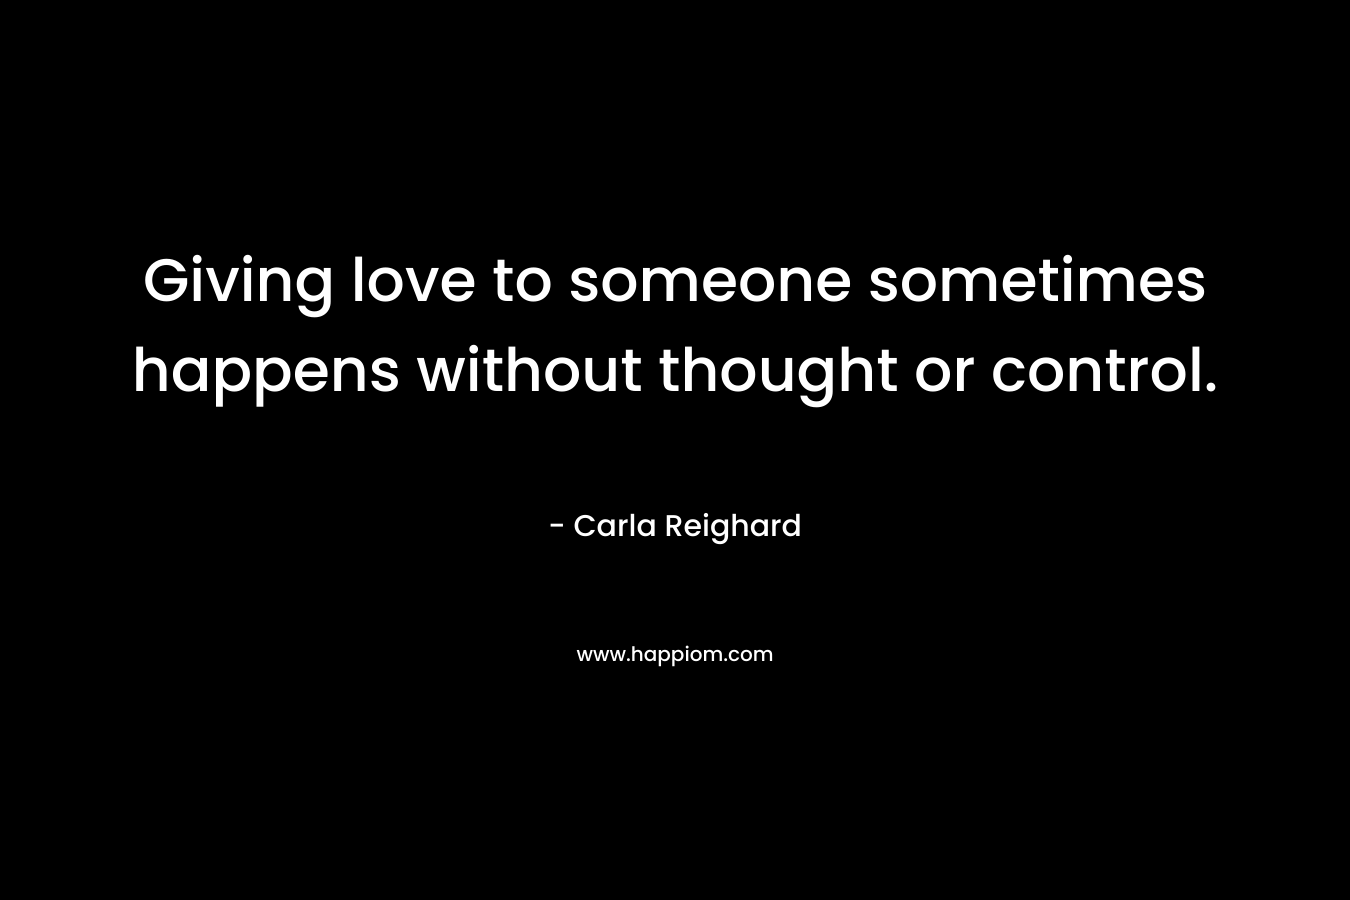 Giving love to someone sometimes happens without thought or control. – Carla Reighard